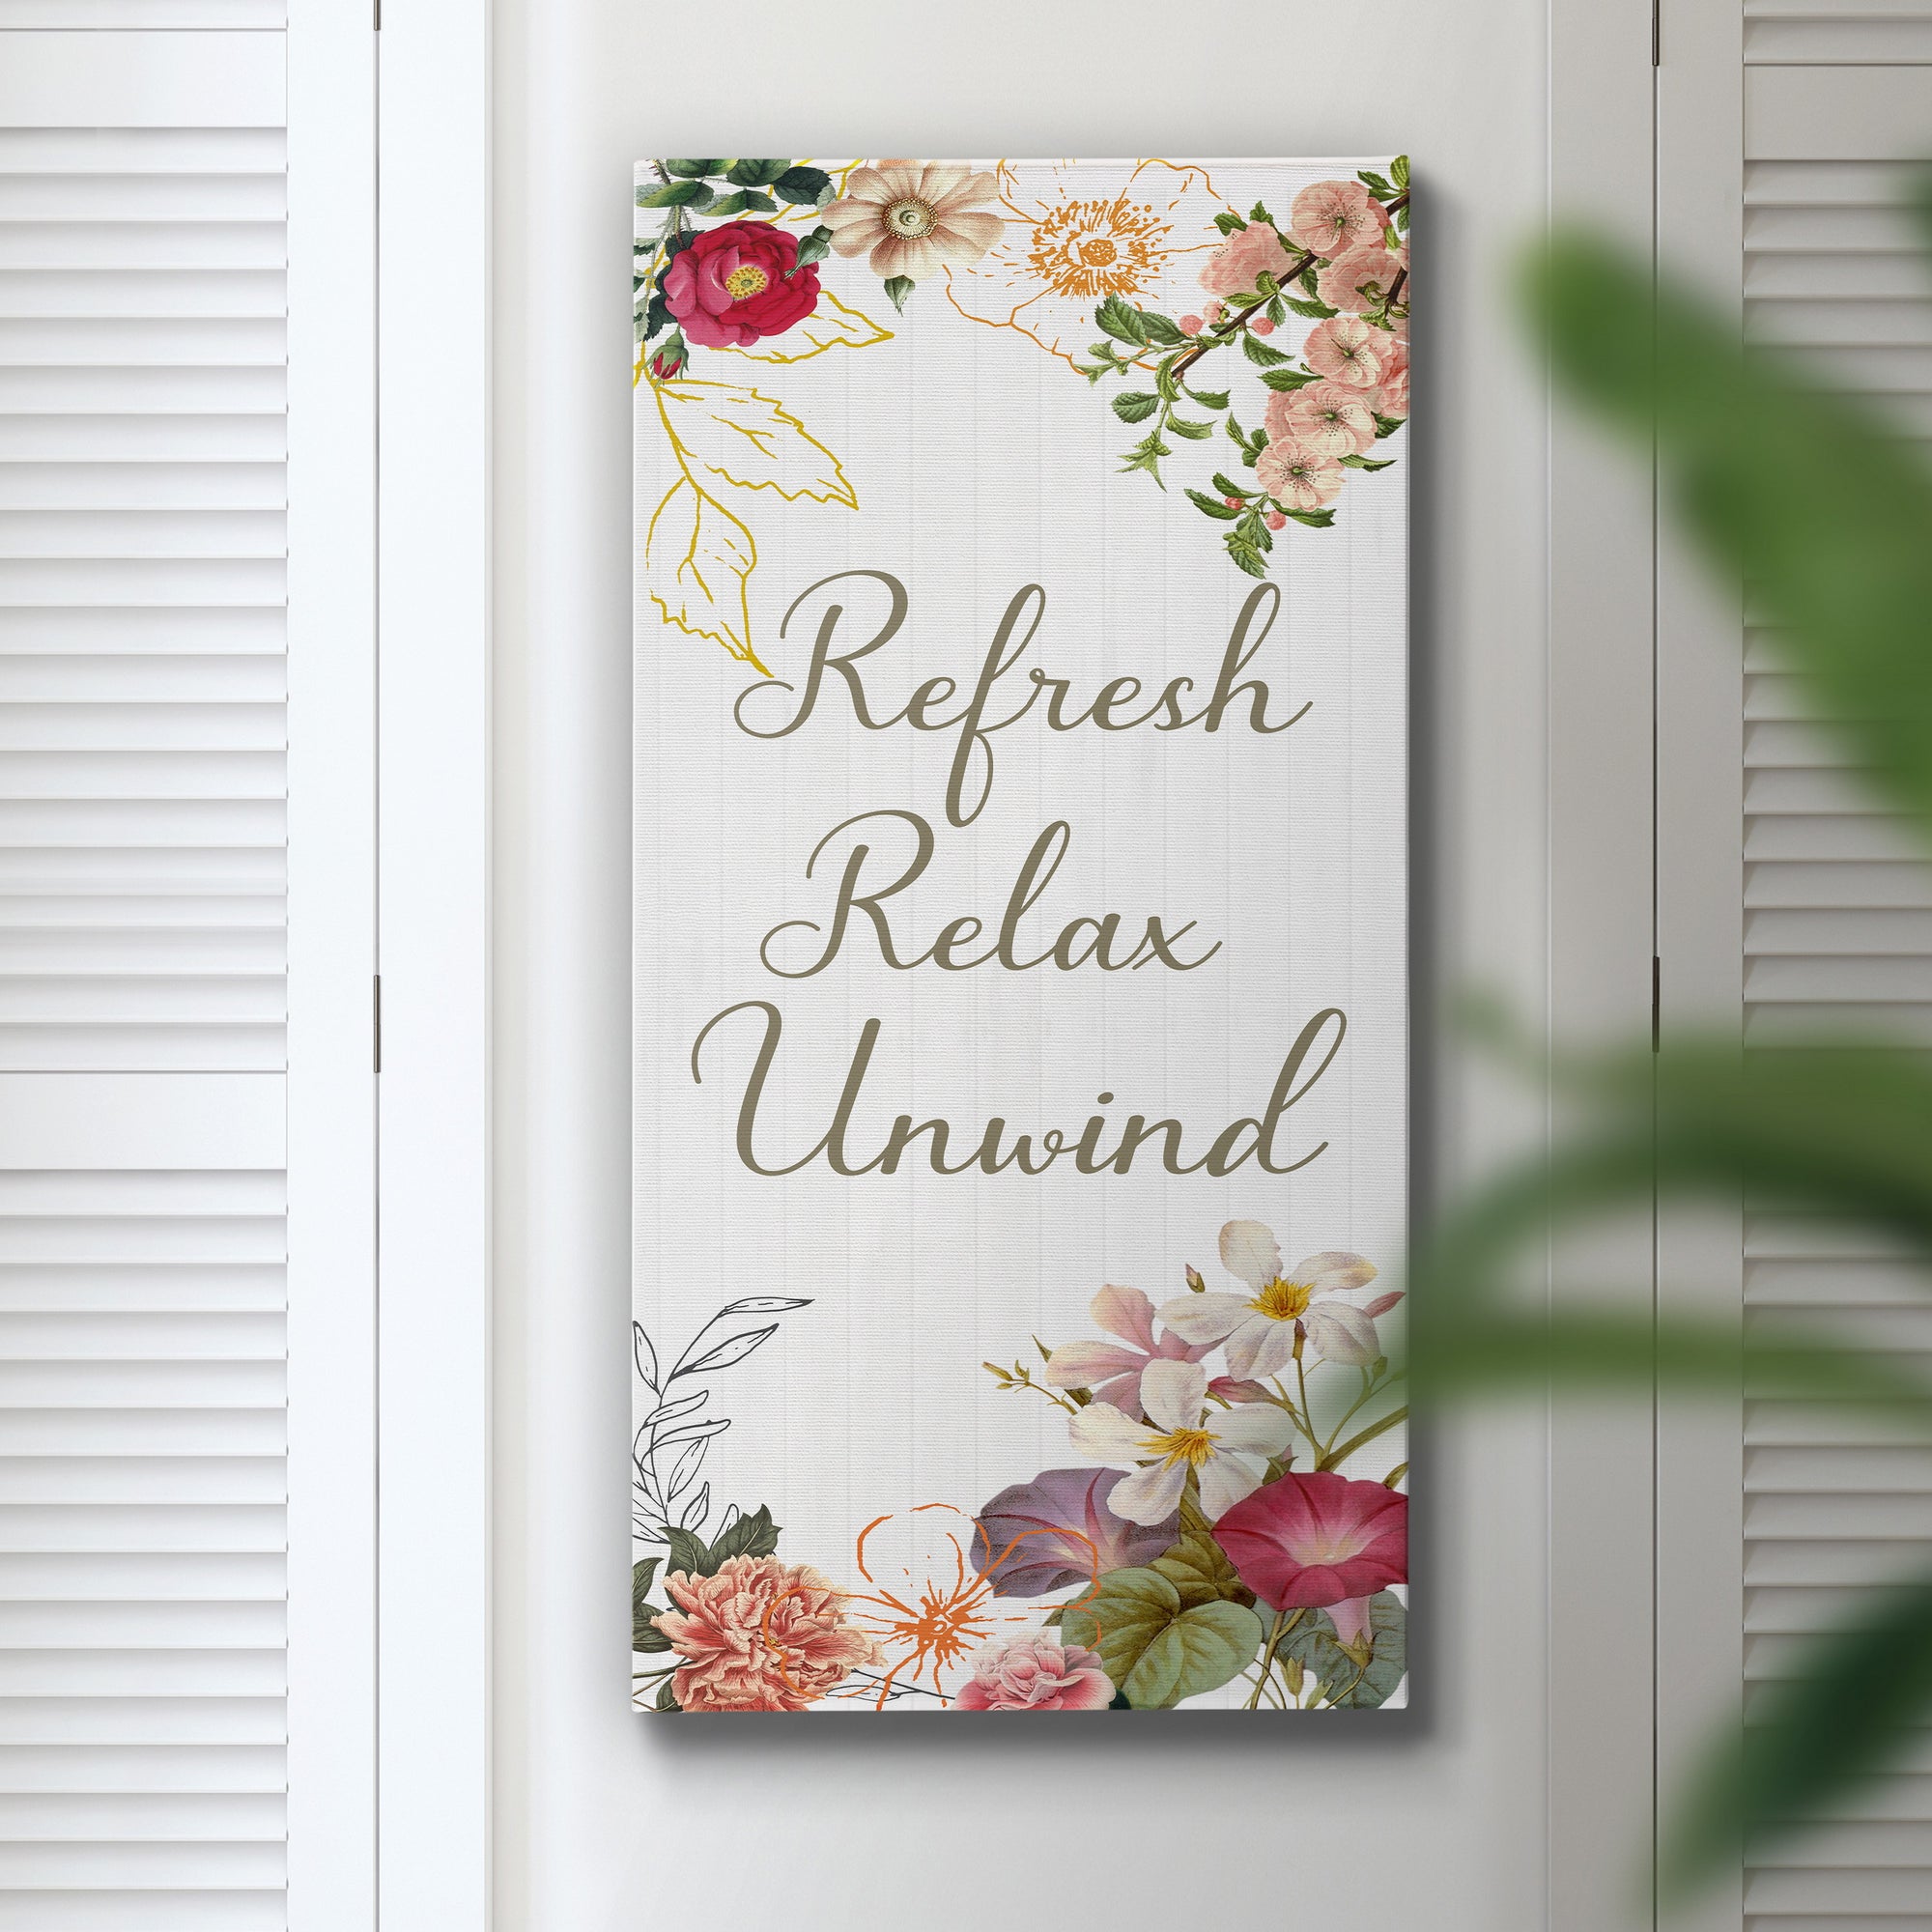 Refresh, Relax, Unwind - Premium Gallery Wrapped Canvas - Ready to Hang